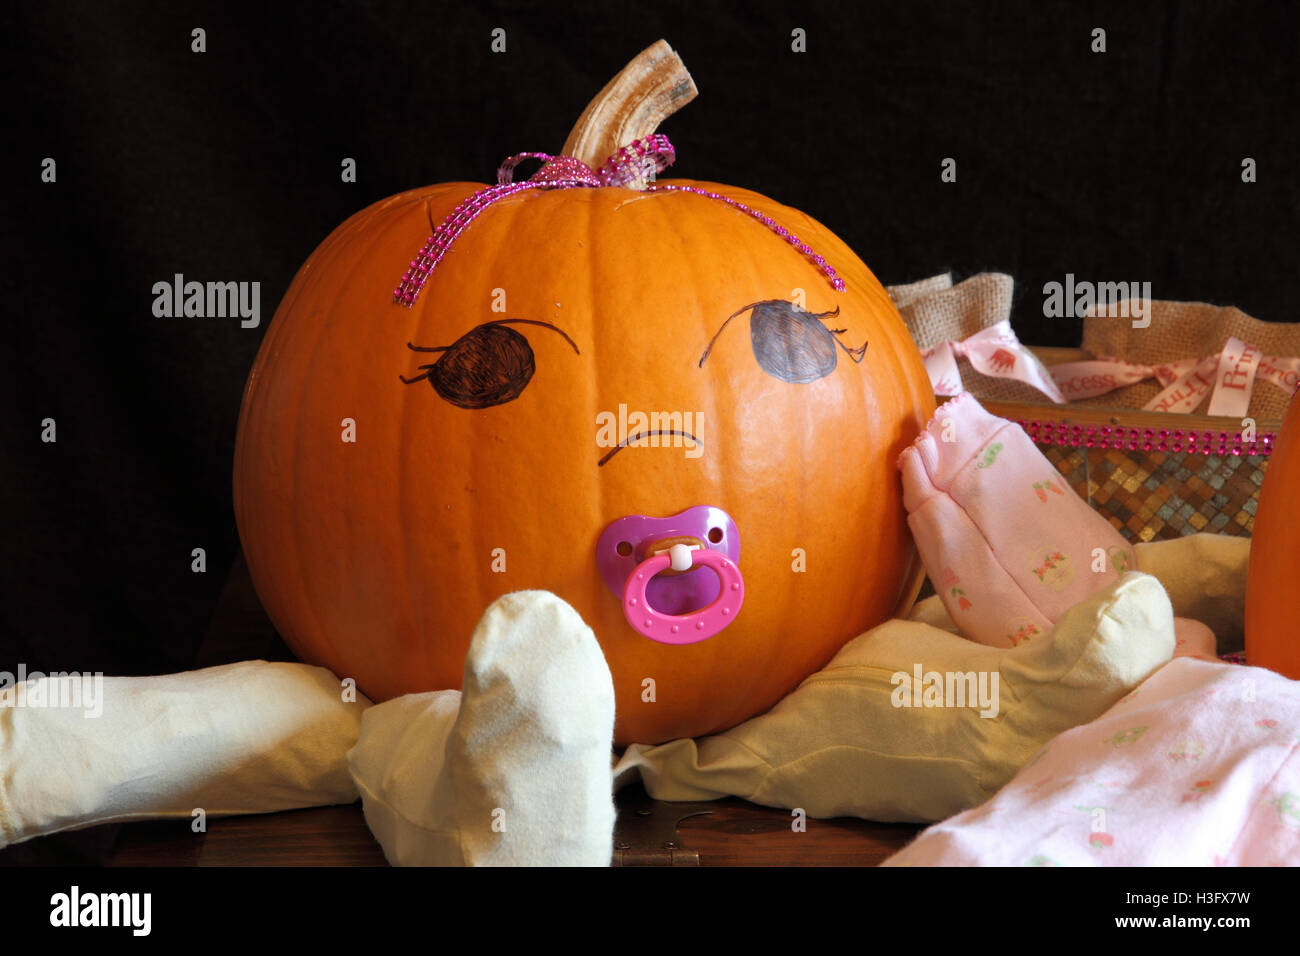 A cute and round pumpkin dressed up like a baby Stock Photo